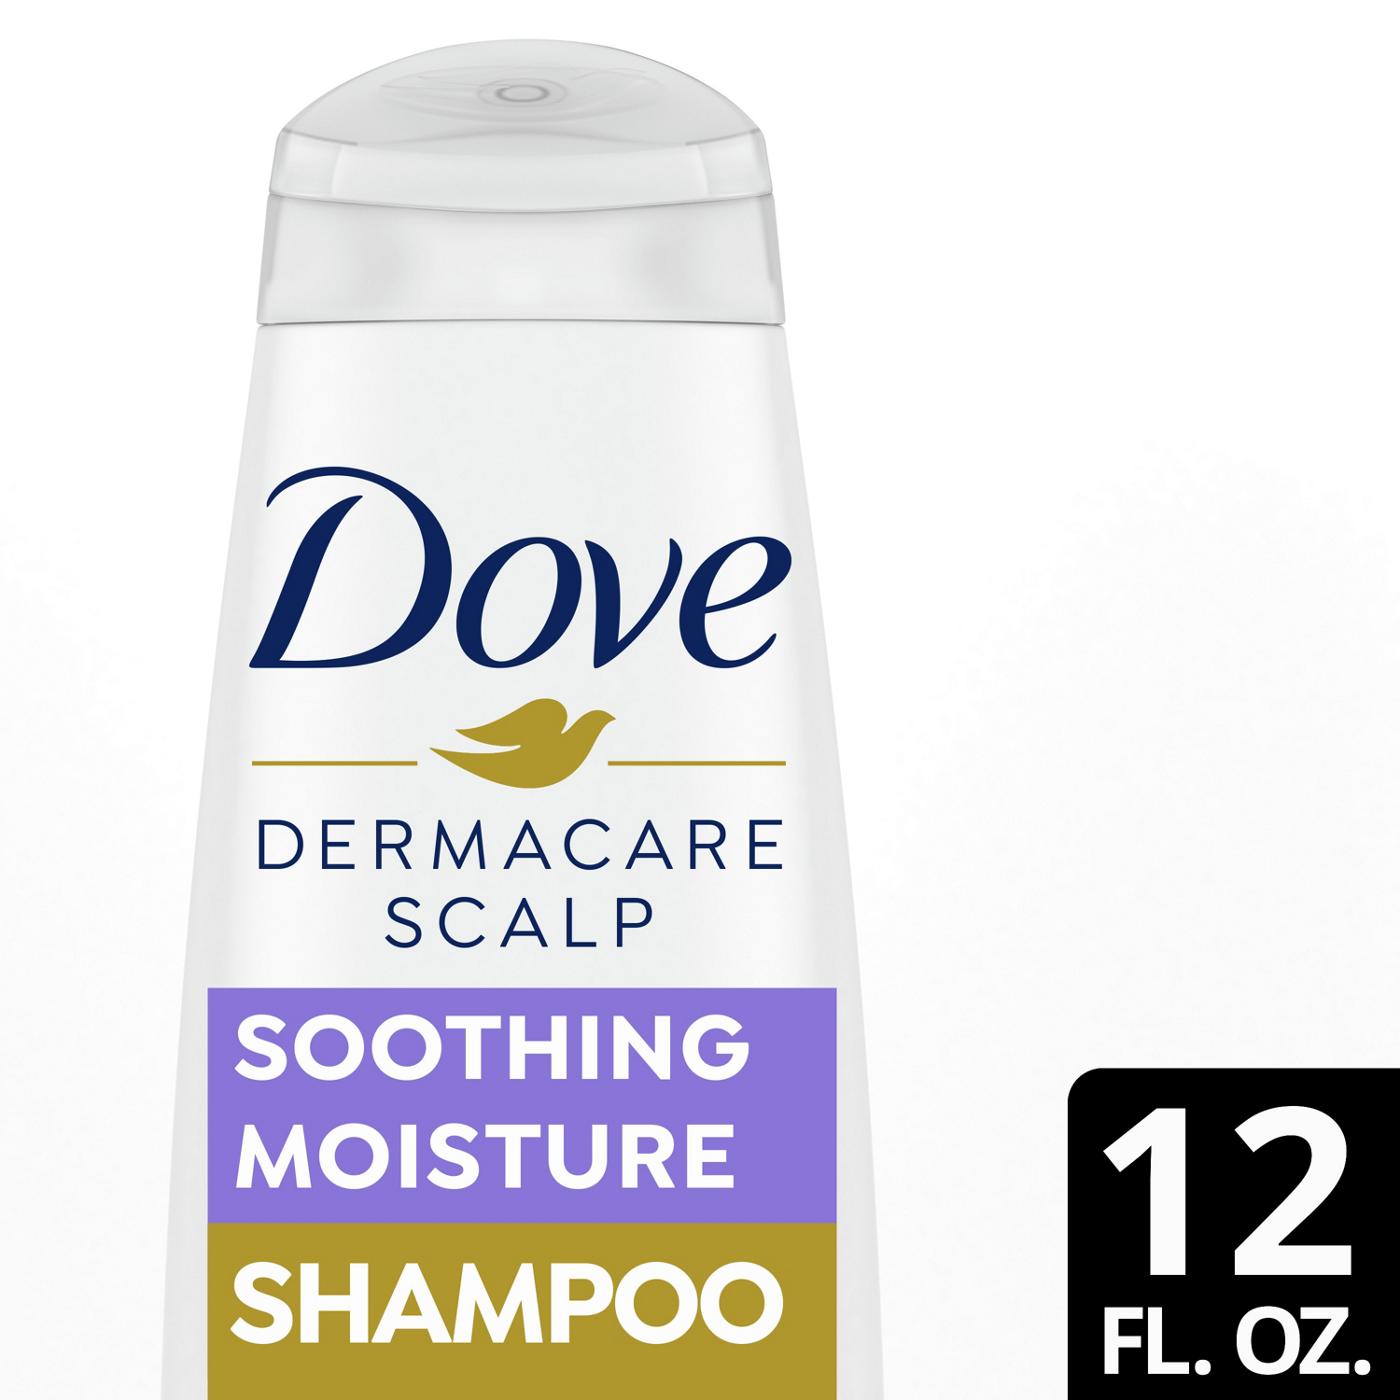 Dove Dermacare Scalp Anti-Dandruff Shampoo - Soothing Moisture; image 4 of 4